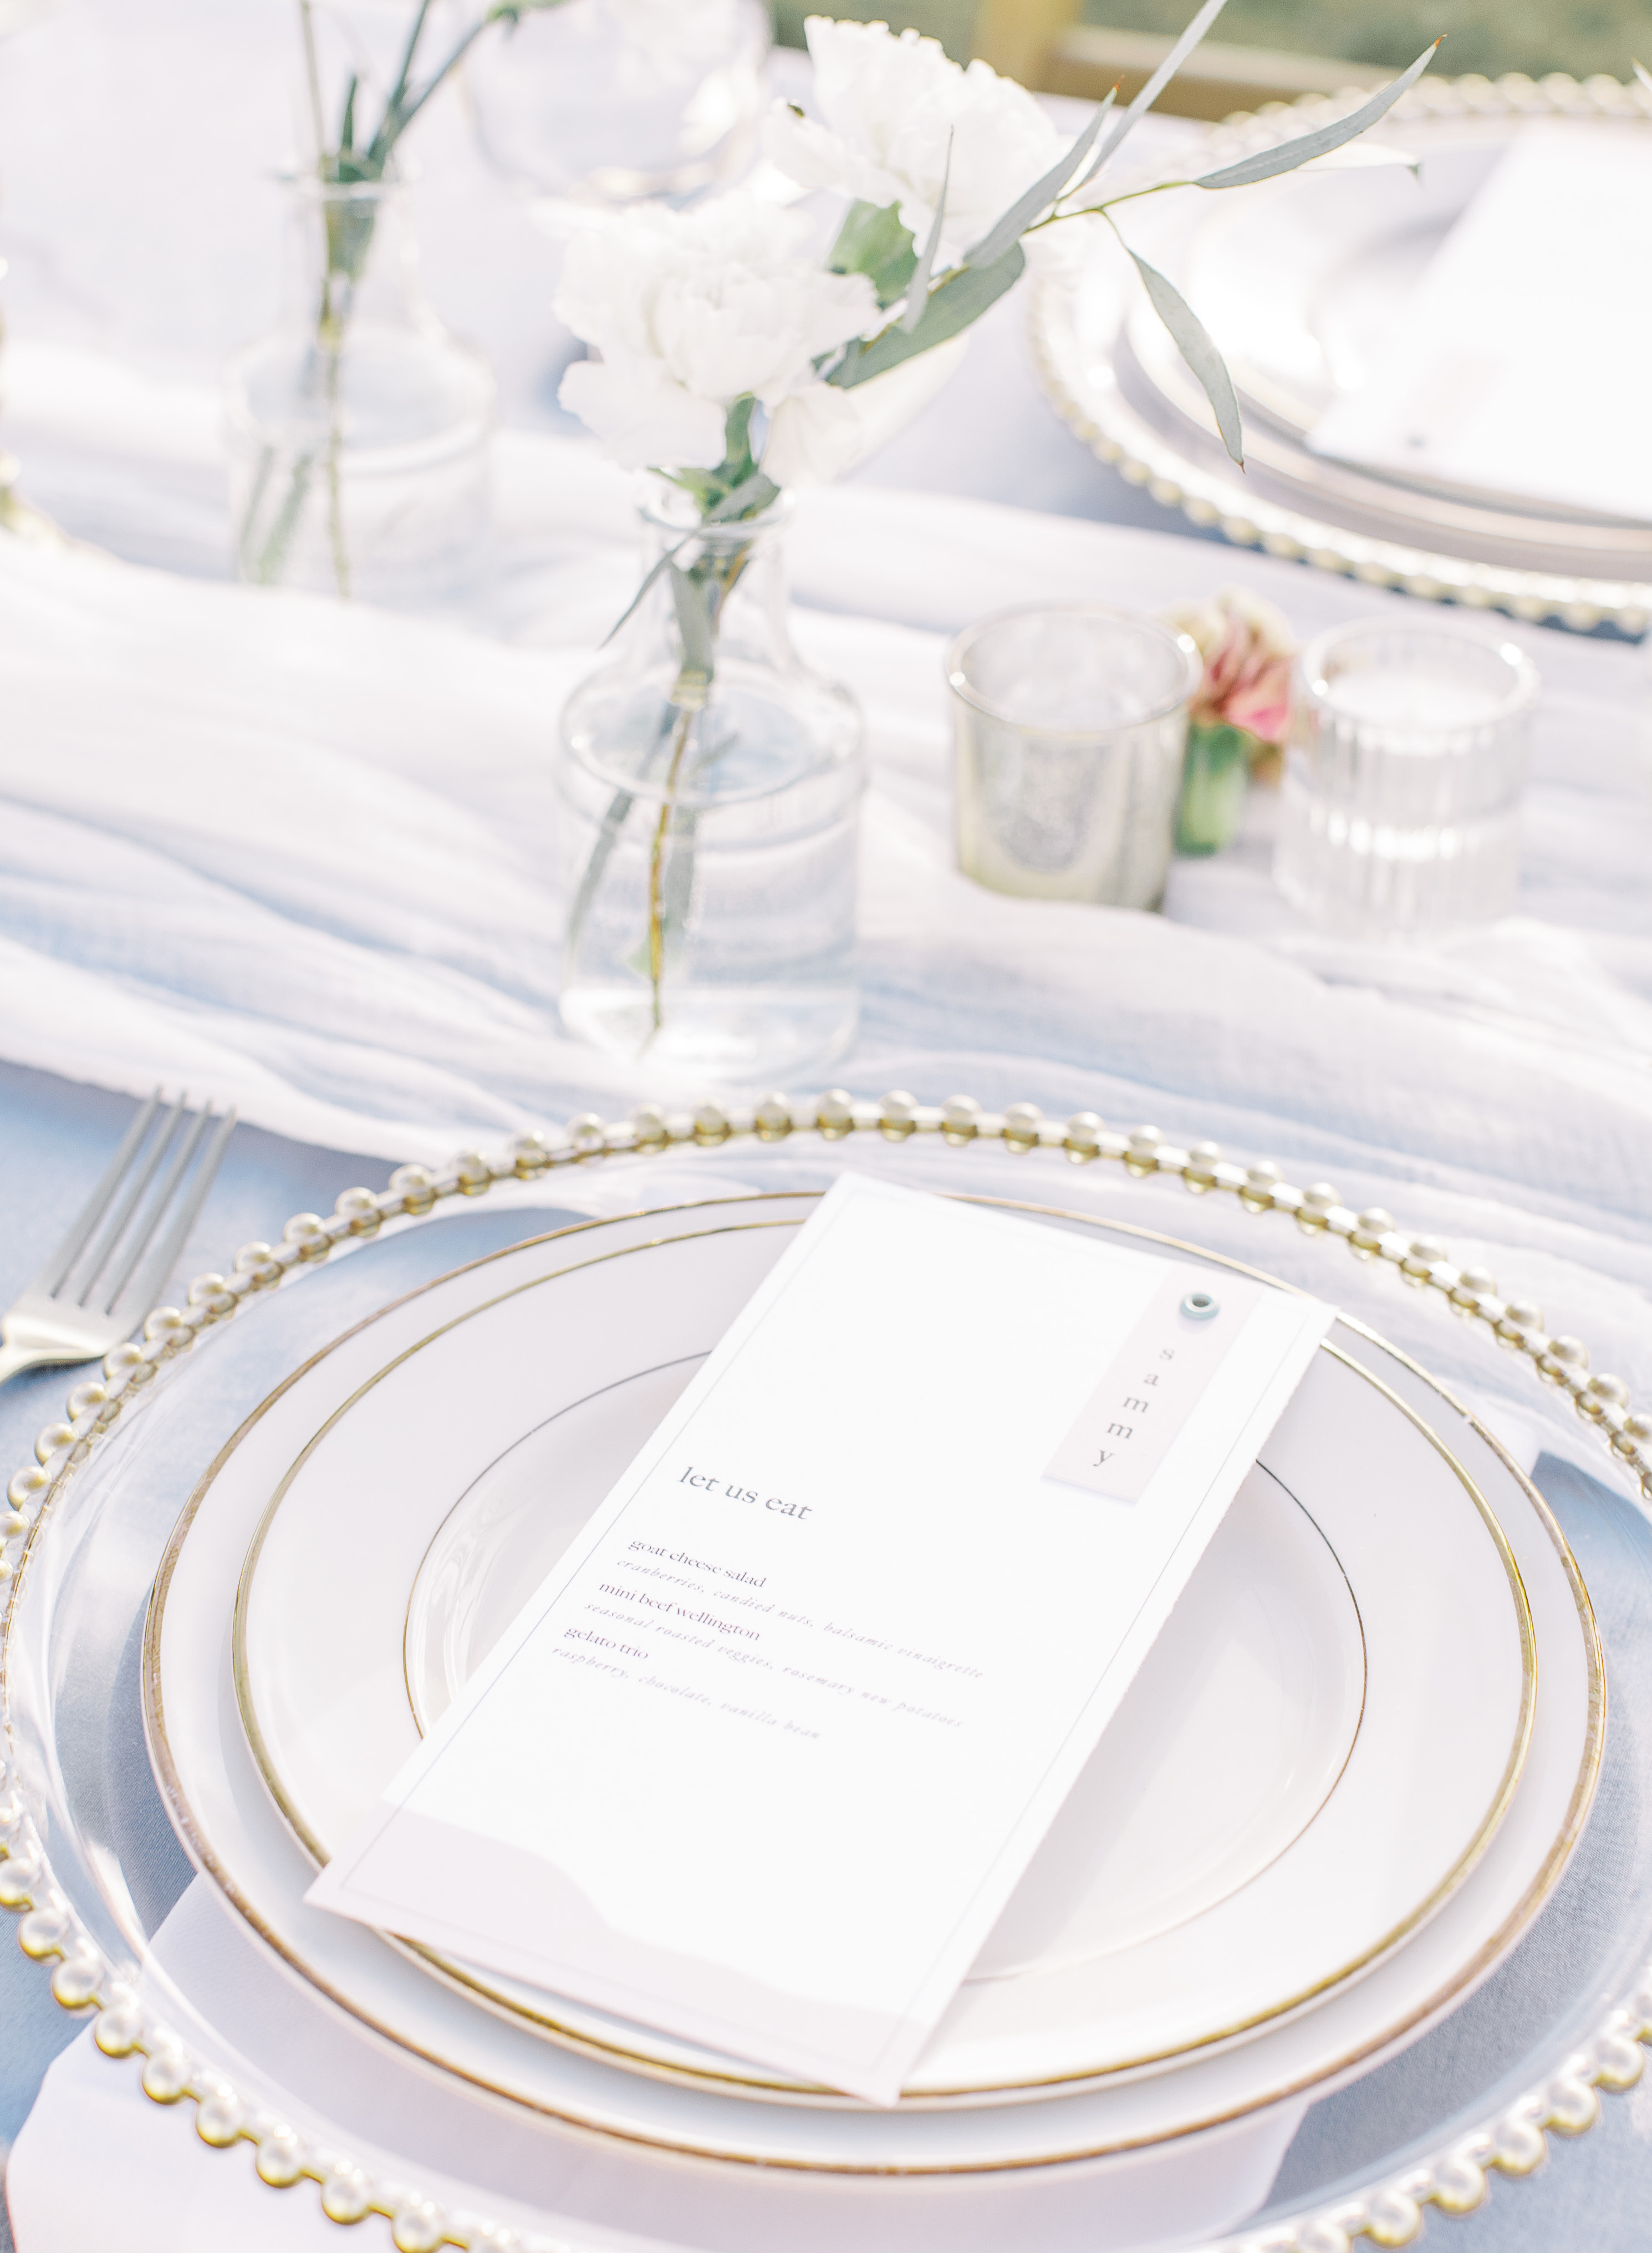 A wedding dinner menu is set on a plate for an alfresco wedding reception in the Texas Hill Country.